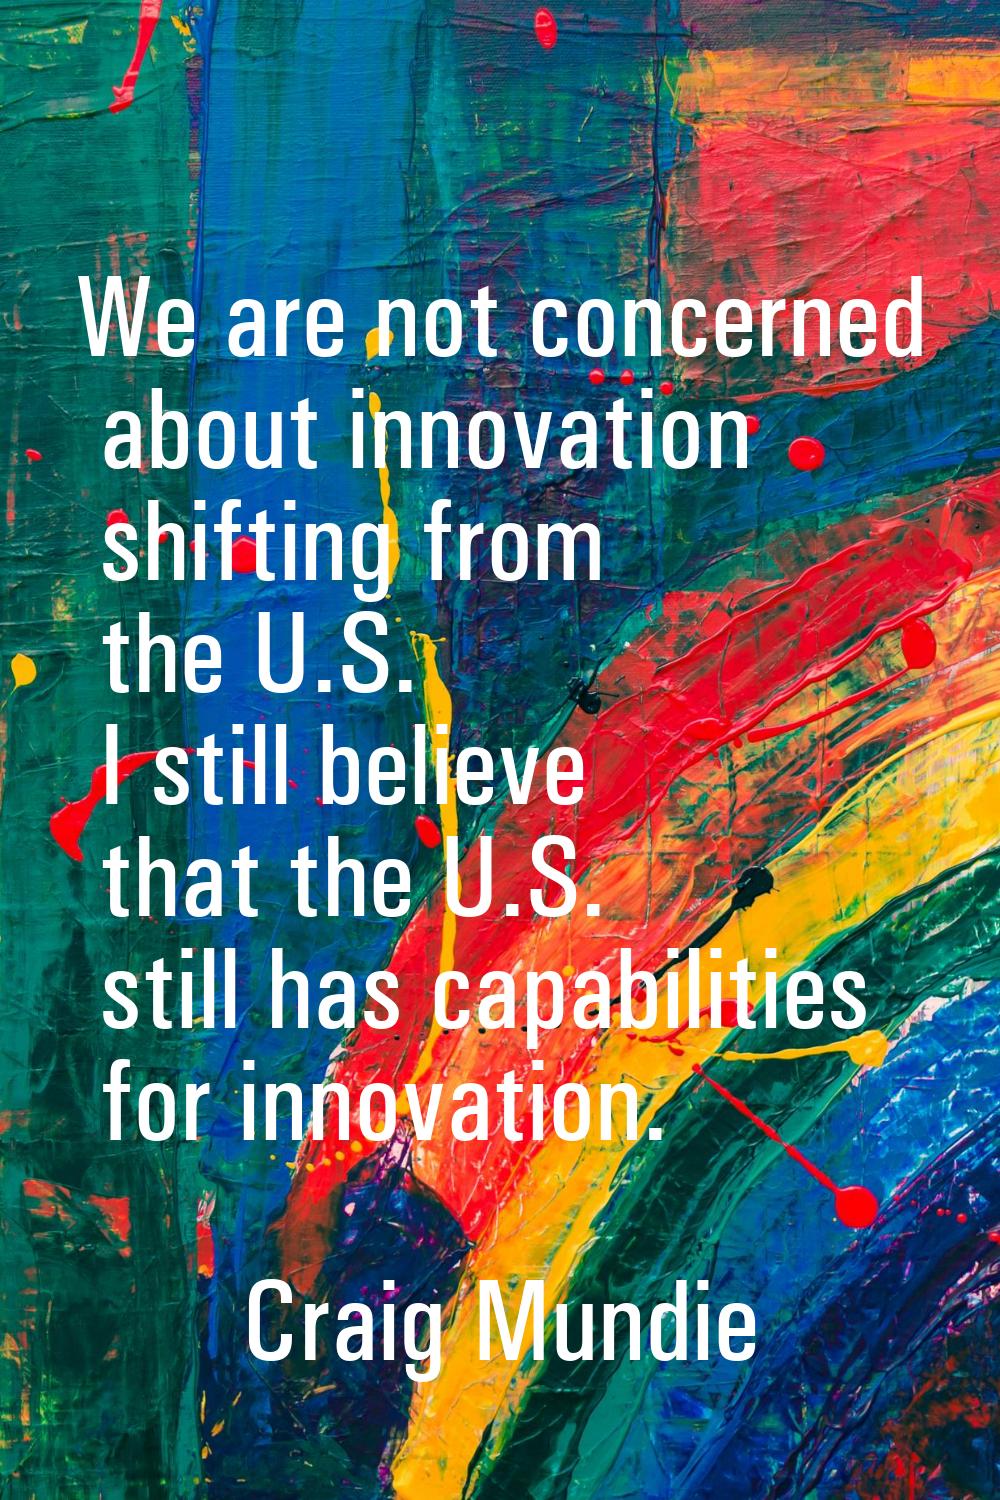 We are not concerned about innovation shifting from the U.S. I still believe that the U.S. still ha